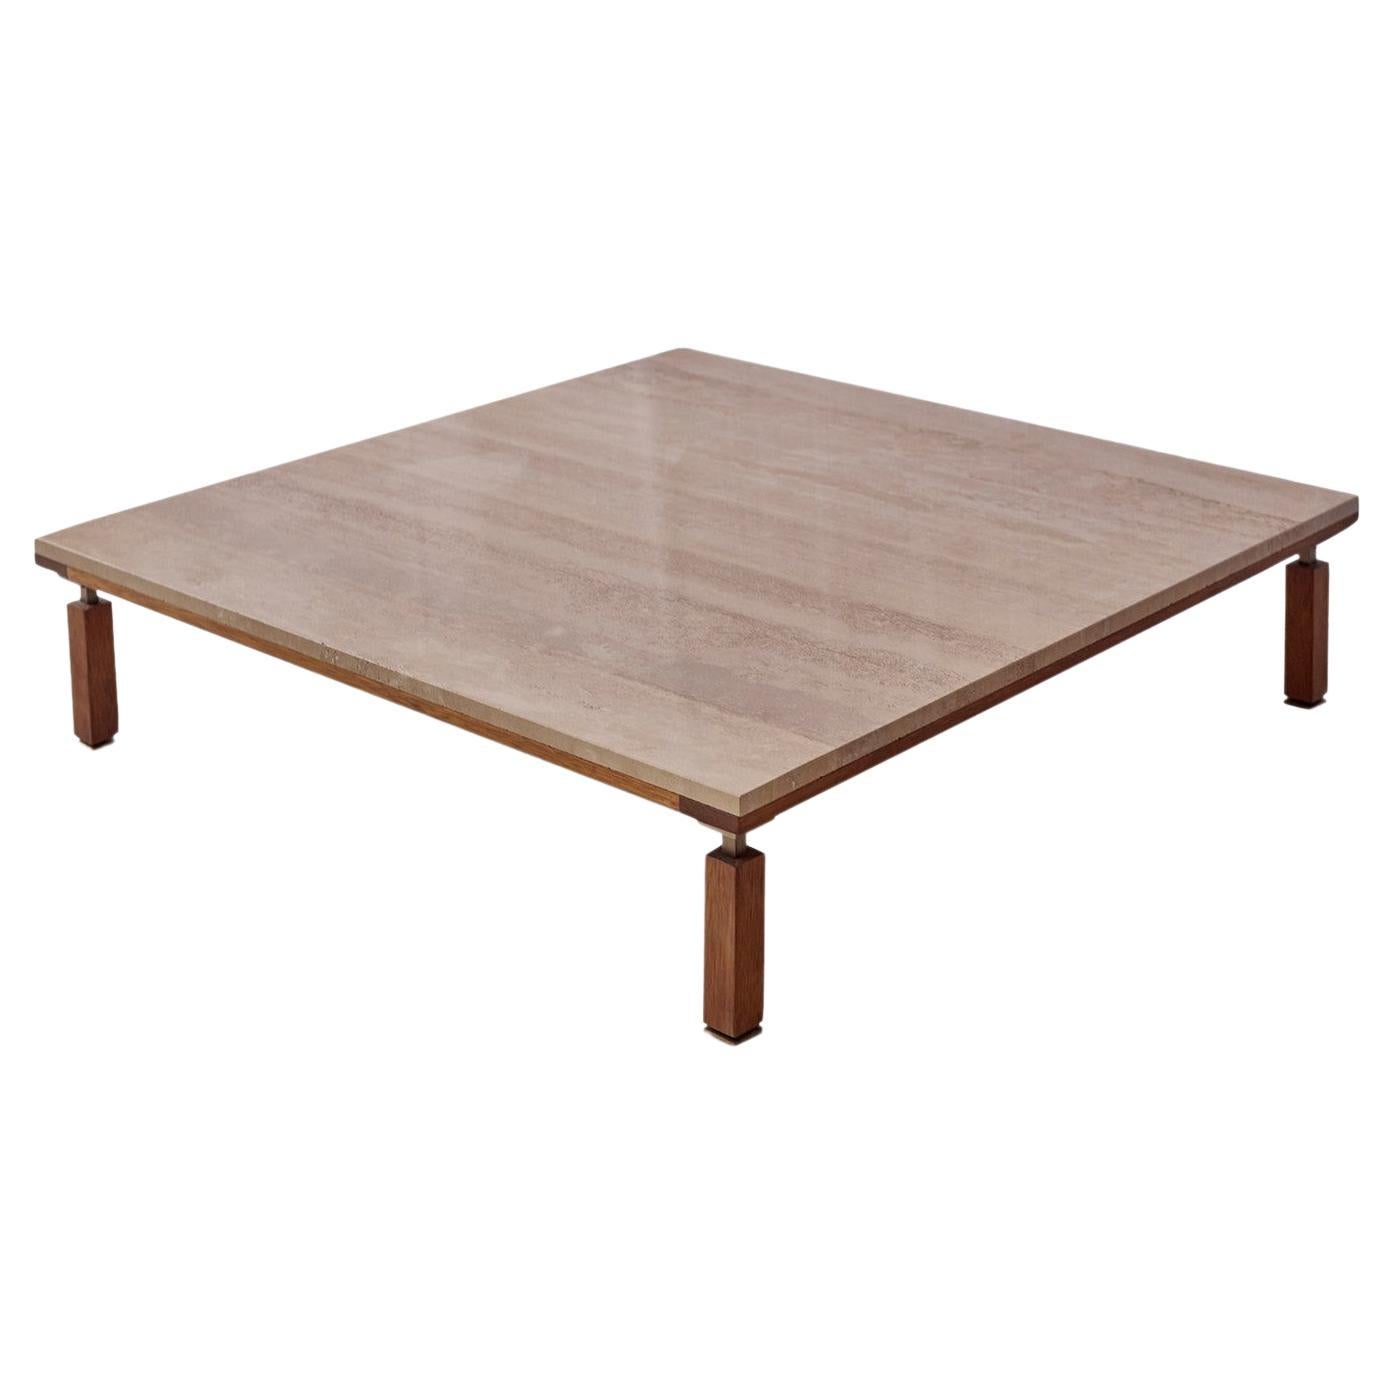 Nerthus Coffee Table by Atra Design